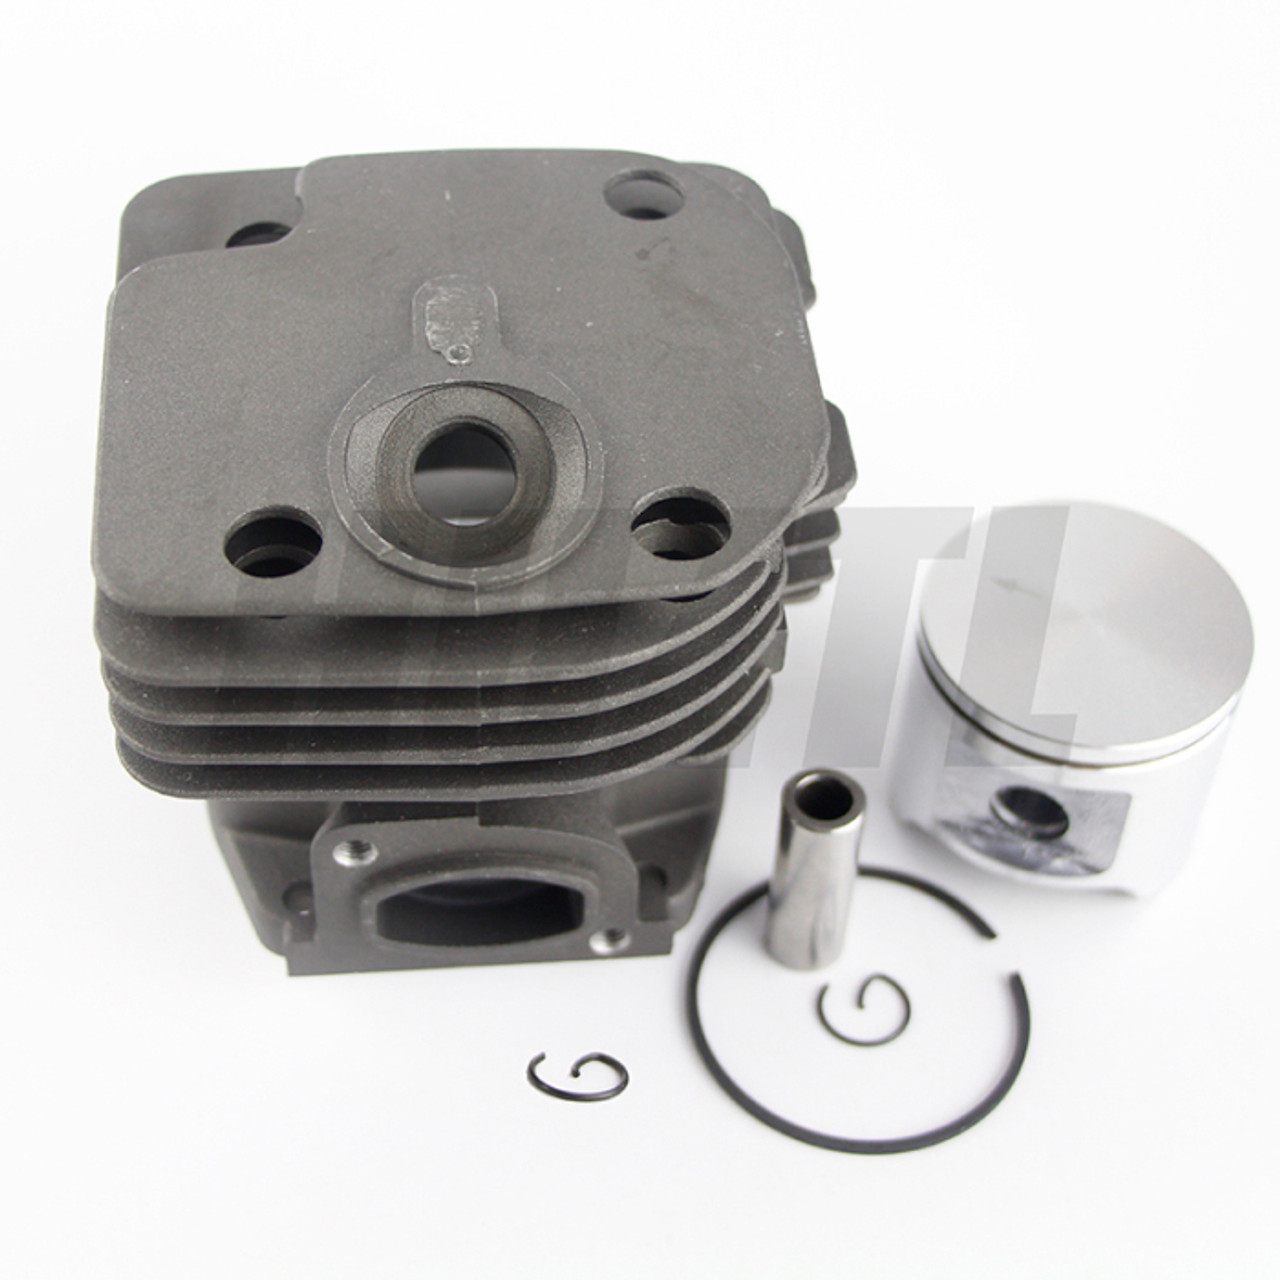 NEW Honda G200 Piston Kit Includes Piston, Rings, Pin and Clips | Auto  Express